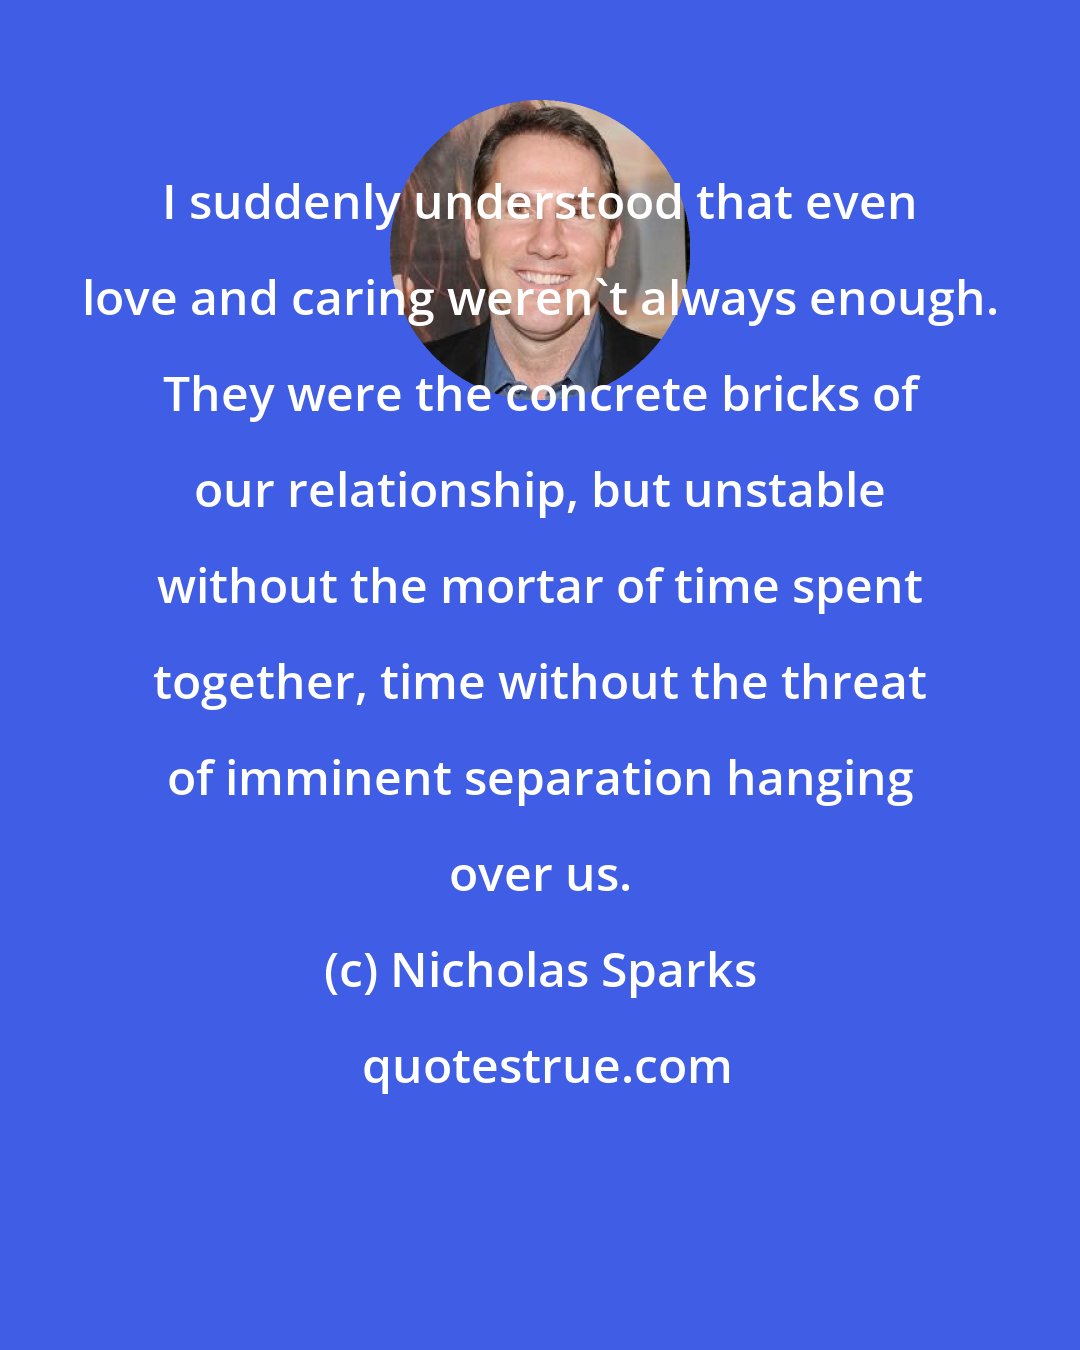 Nicholas Sparks: I suddenly understood that even love and caring weren't always enough. They were the concrete bricks of our relationship, but unstable without the mortar of time spent together, time without the threat of imminent separation hanging over us.